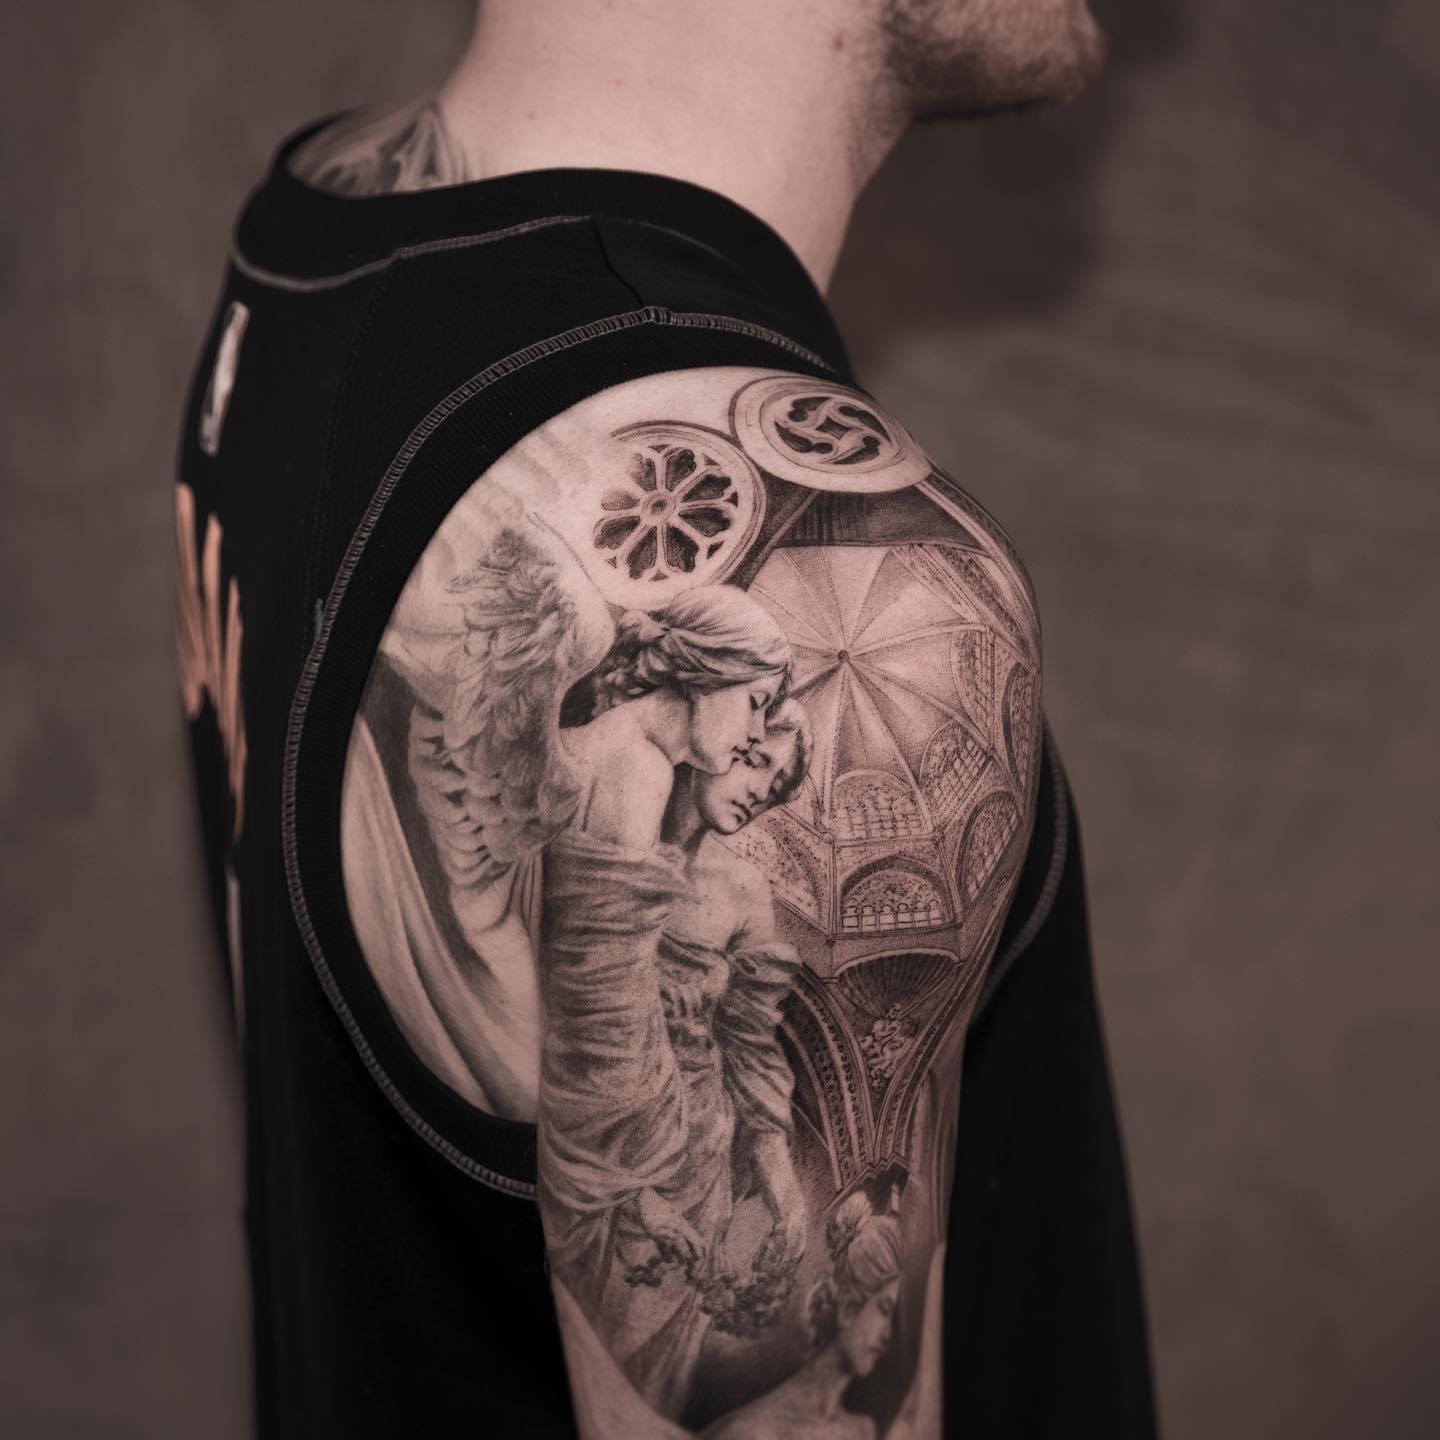 20 Angel tattoo ideas for men and women 